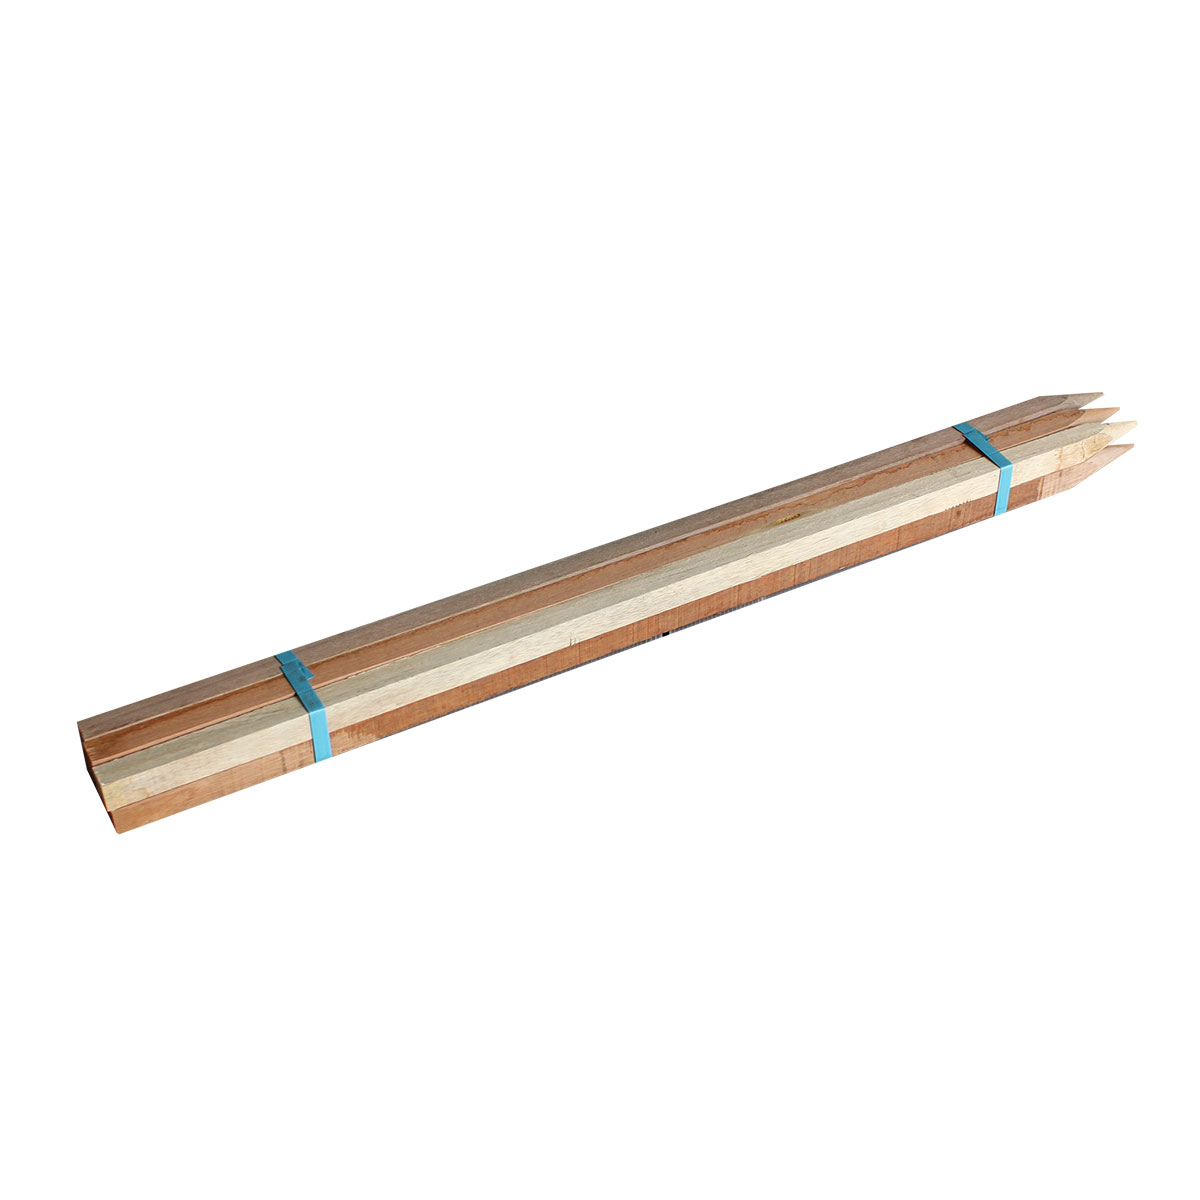 Hardwood Stakes 25 x 25 x 900mm - 6 Pack